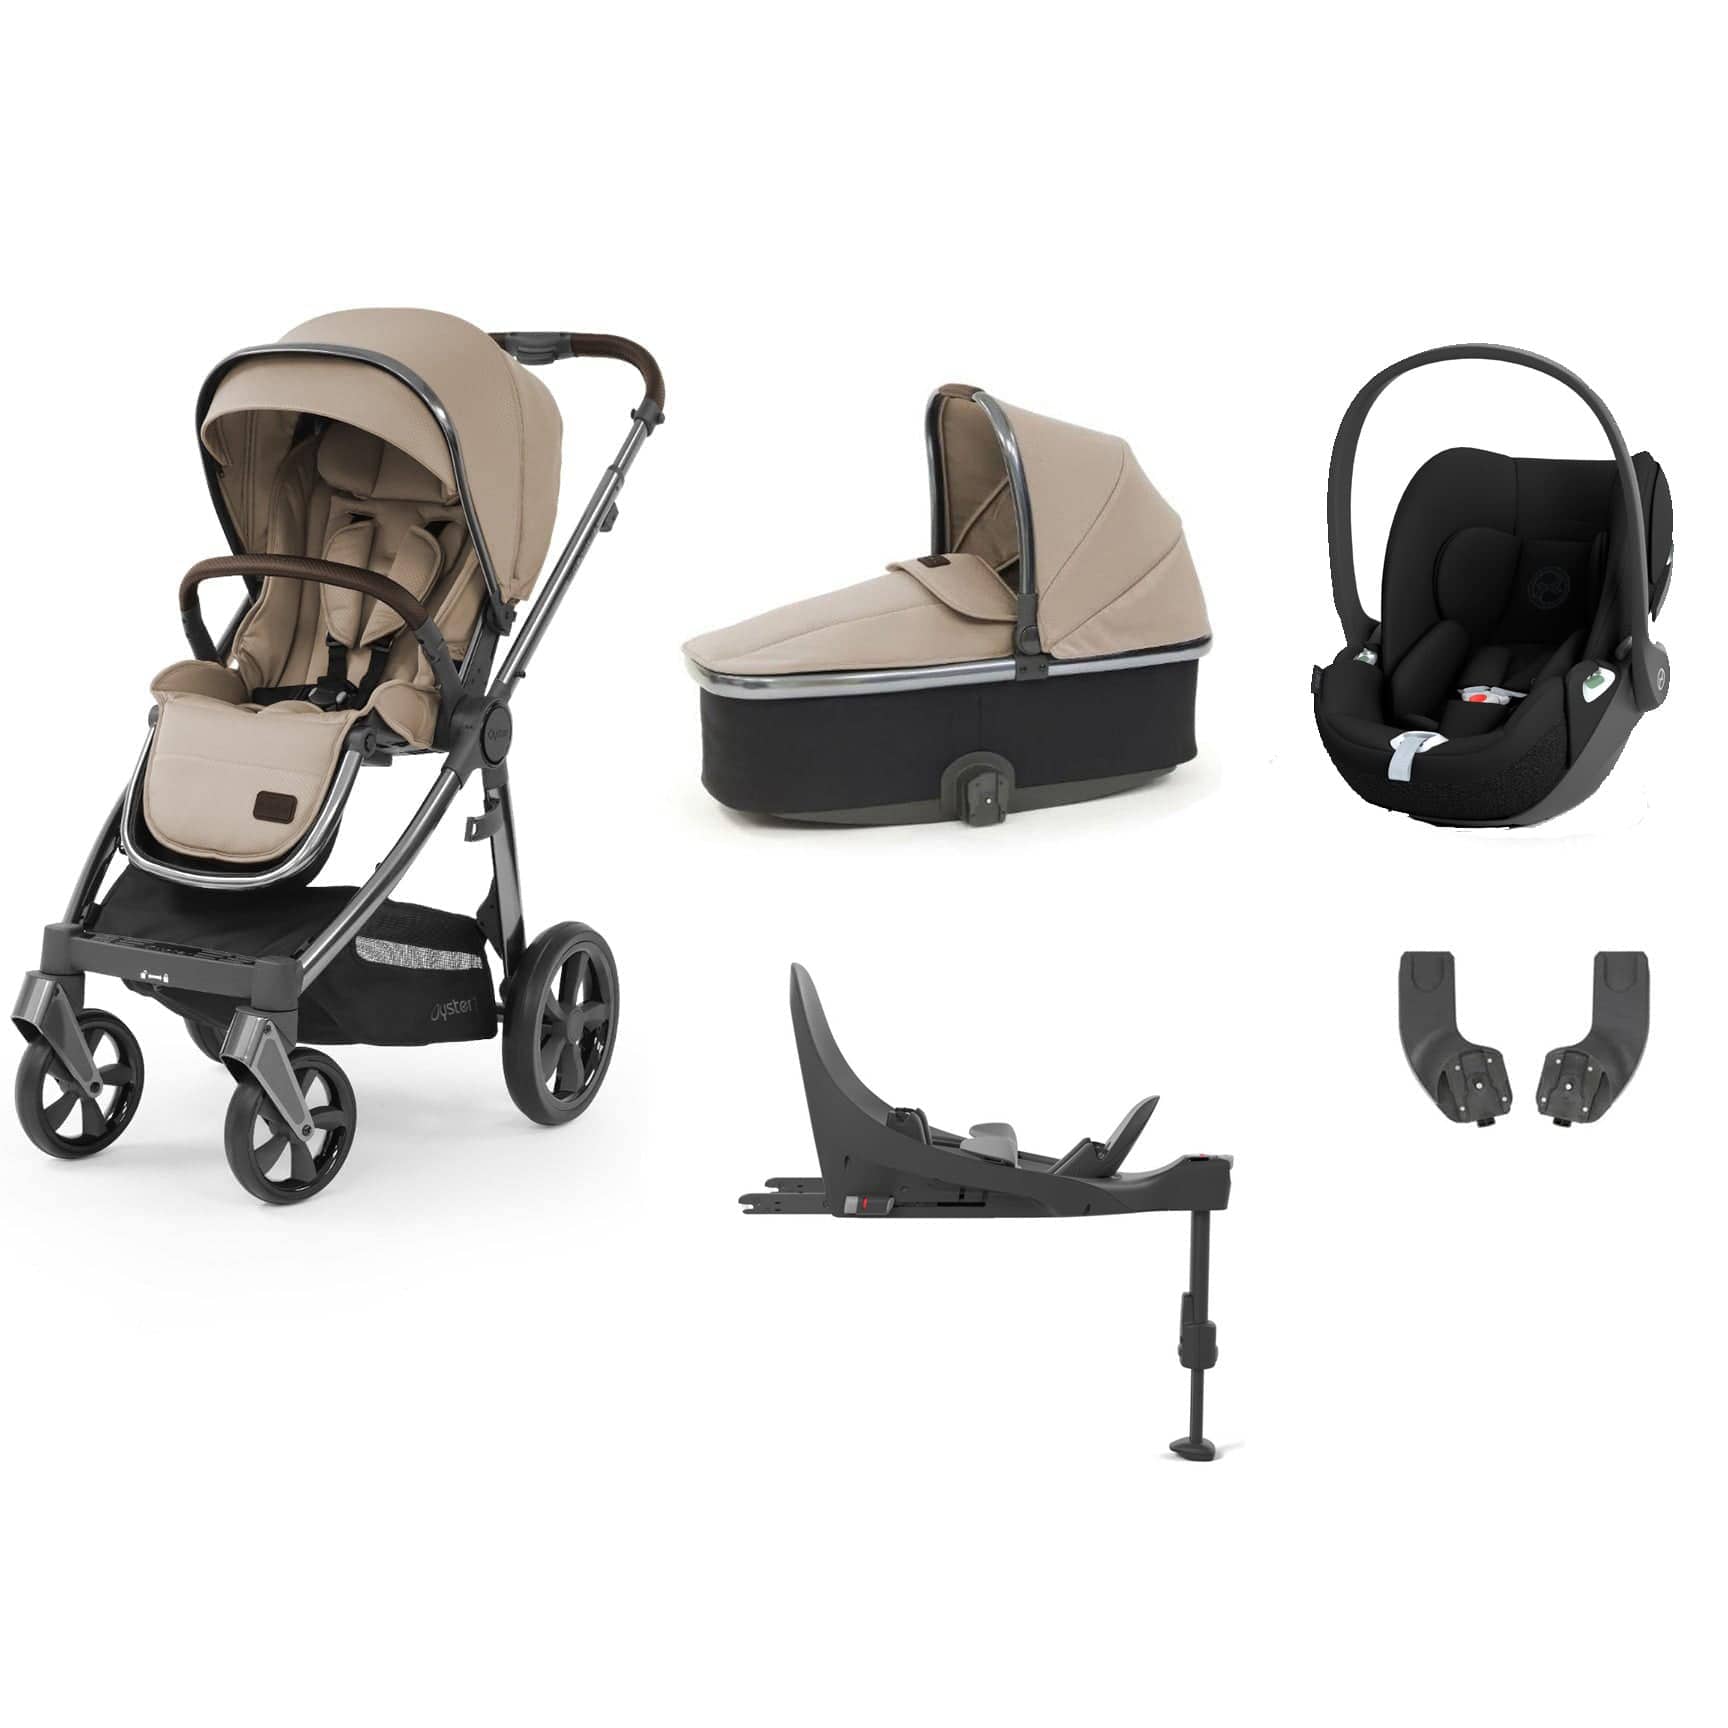 Babystyle Oyster 3 Essential Bundle with Car Seat in Butterscotch Travel Systems 13567-BTS 5060711564630